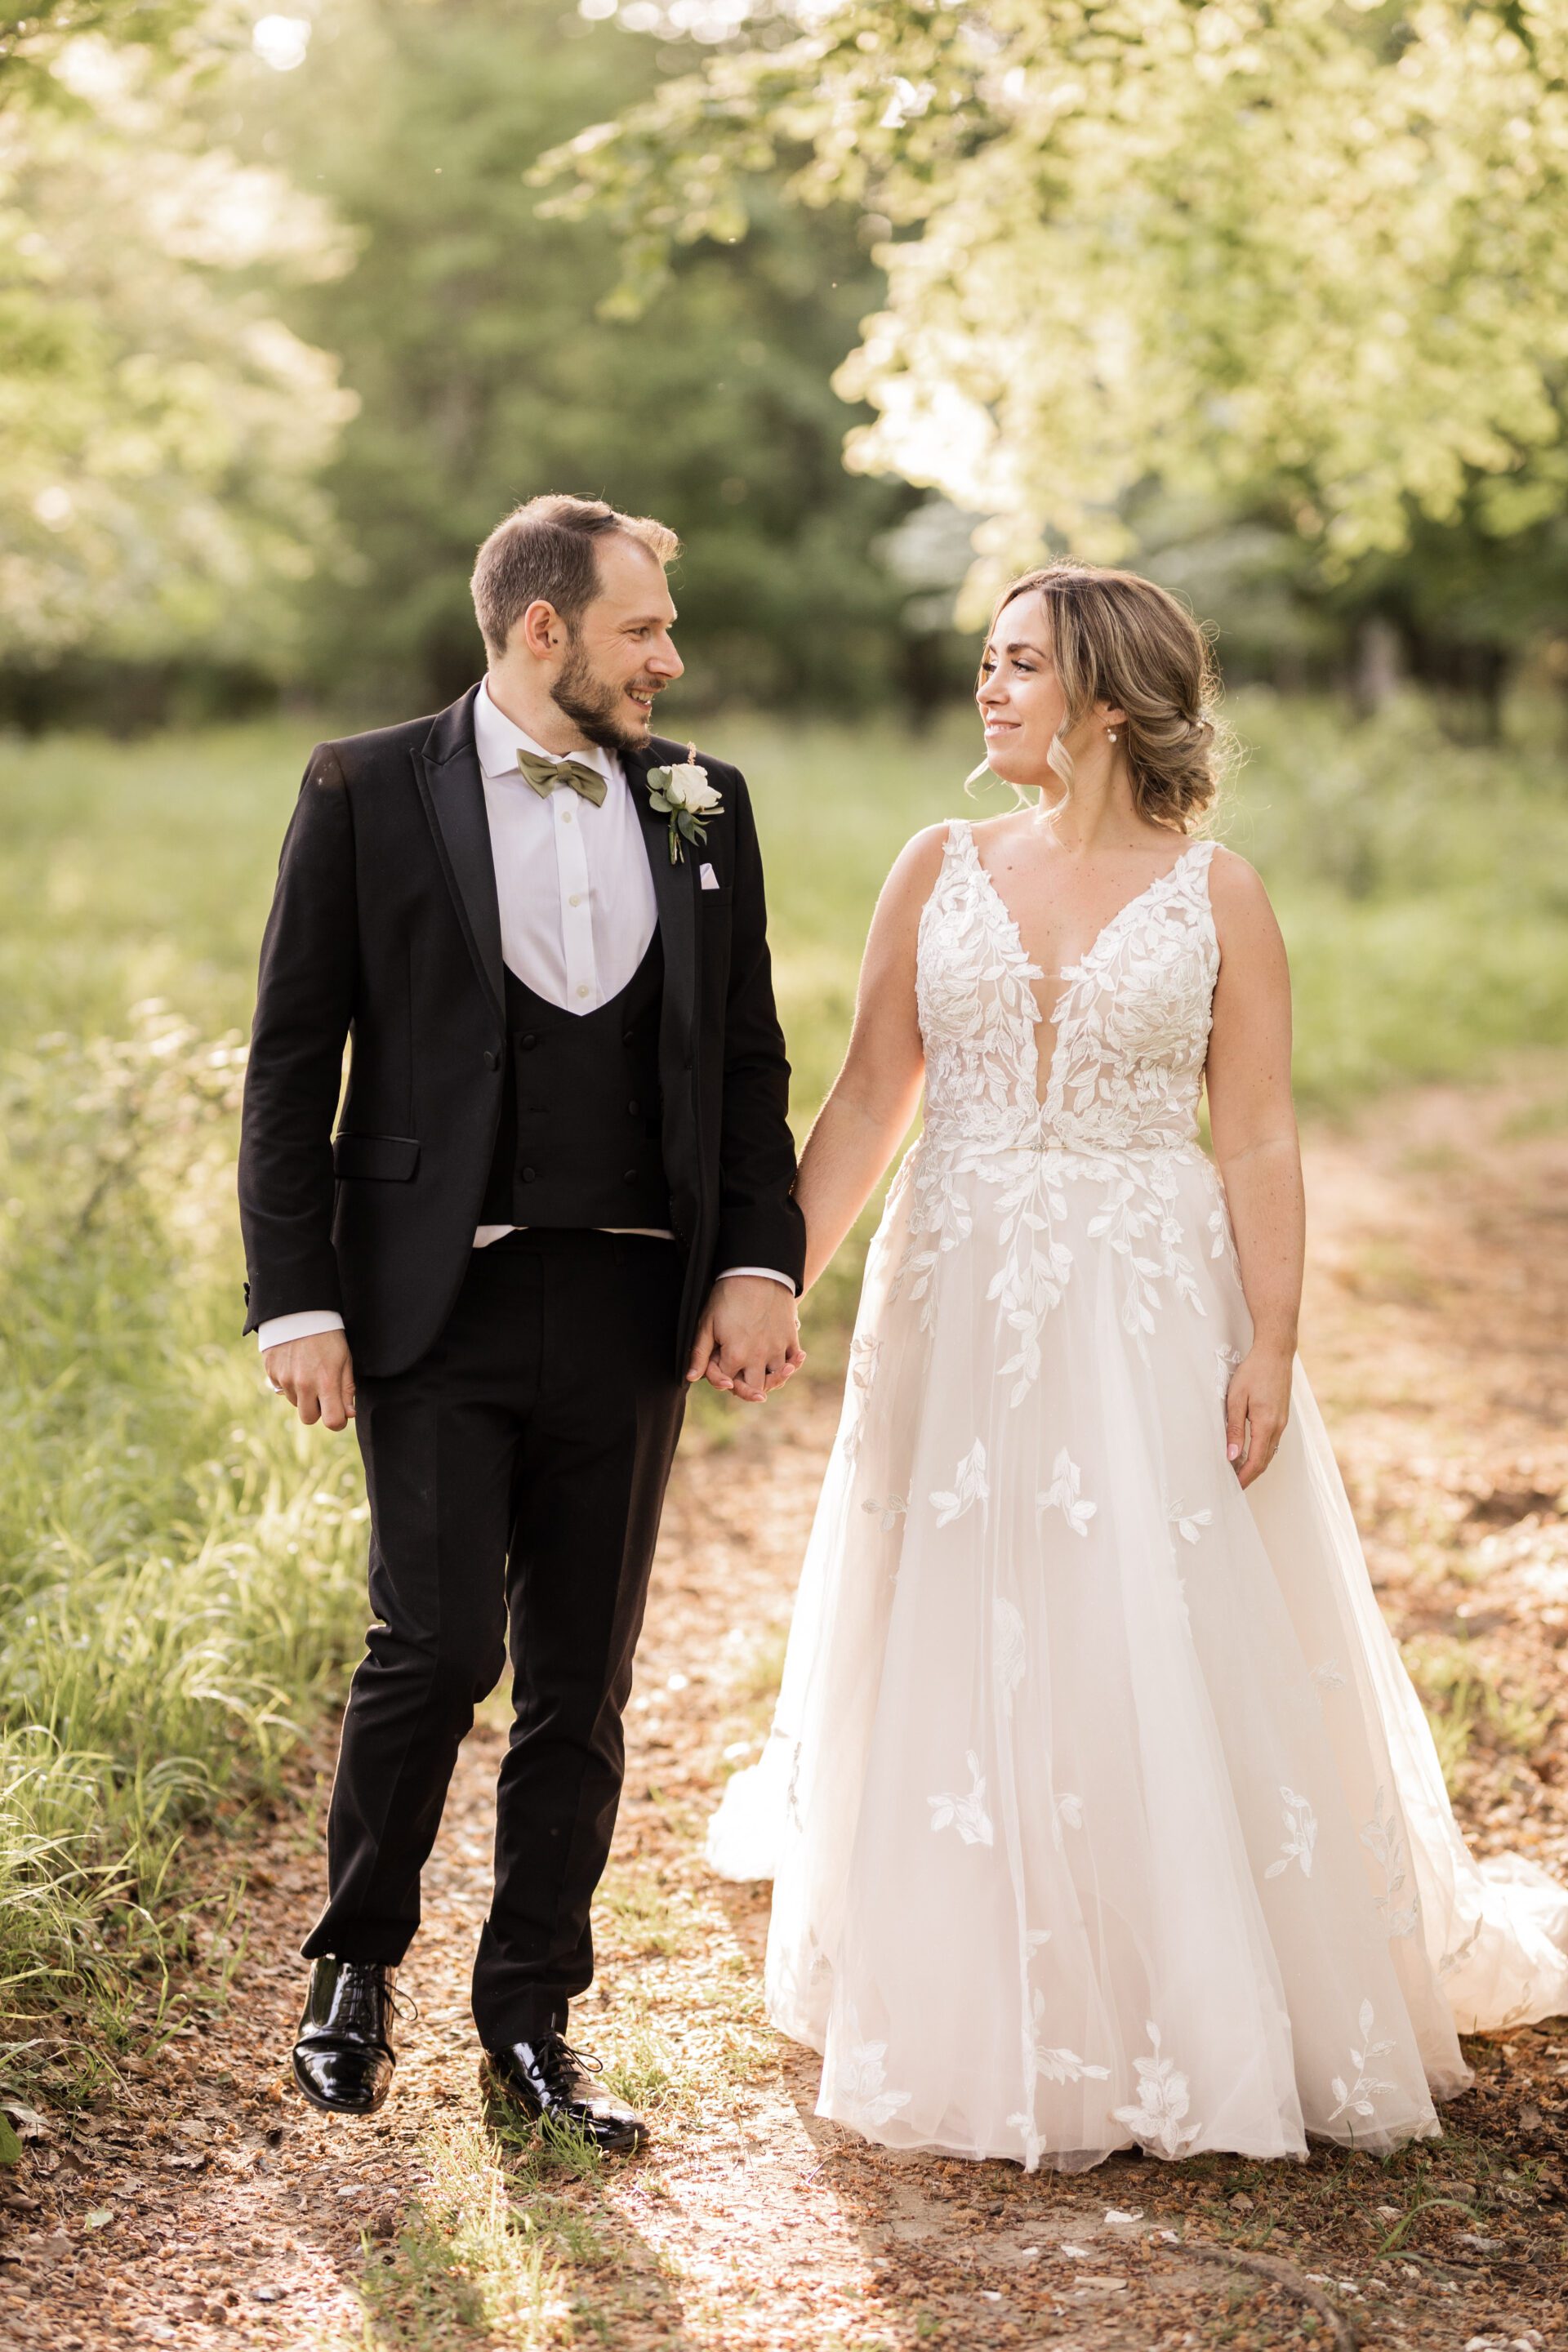 The bride and groom walk hand in hand during golden hour at their barn wedding